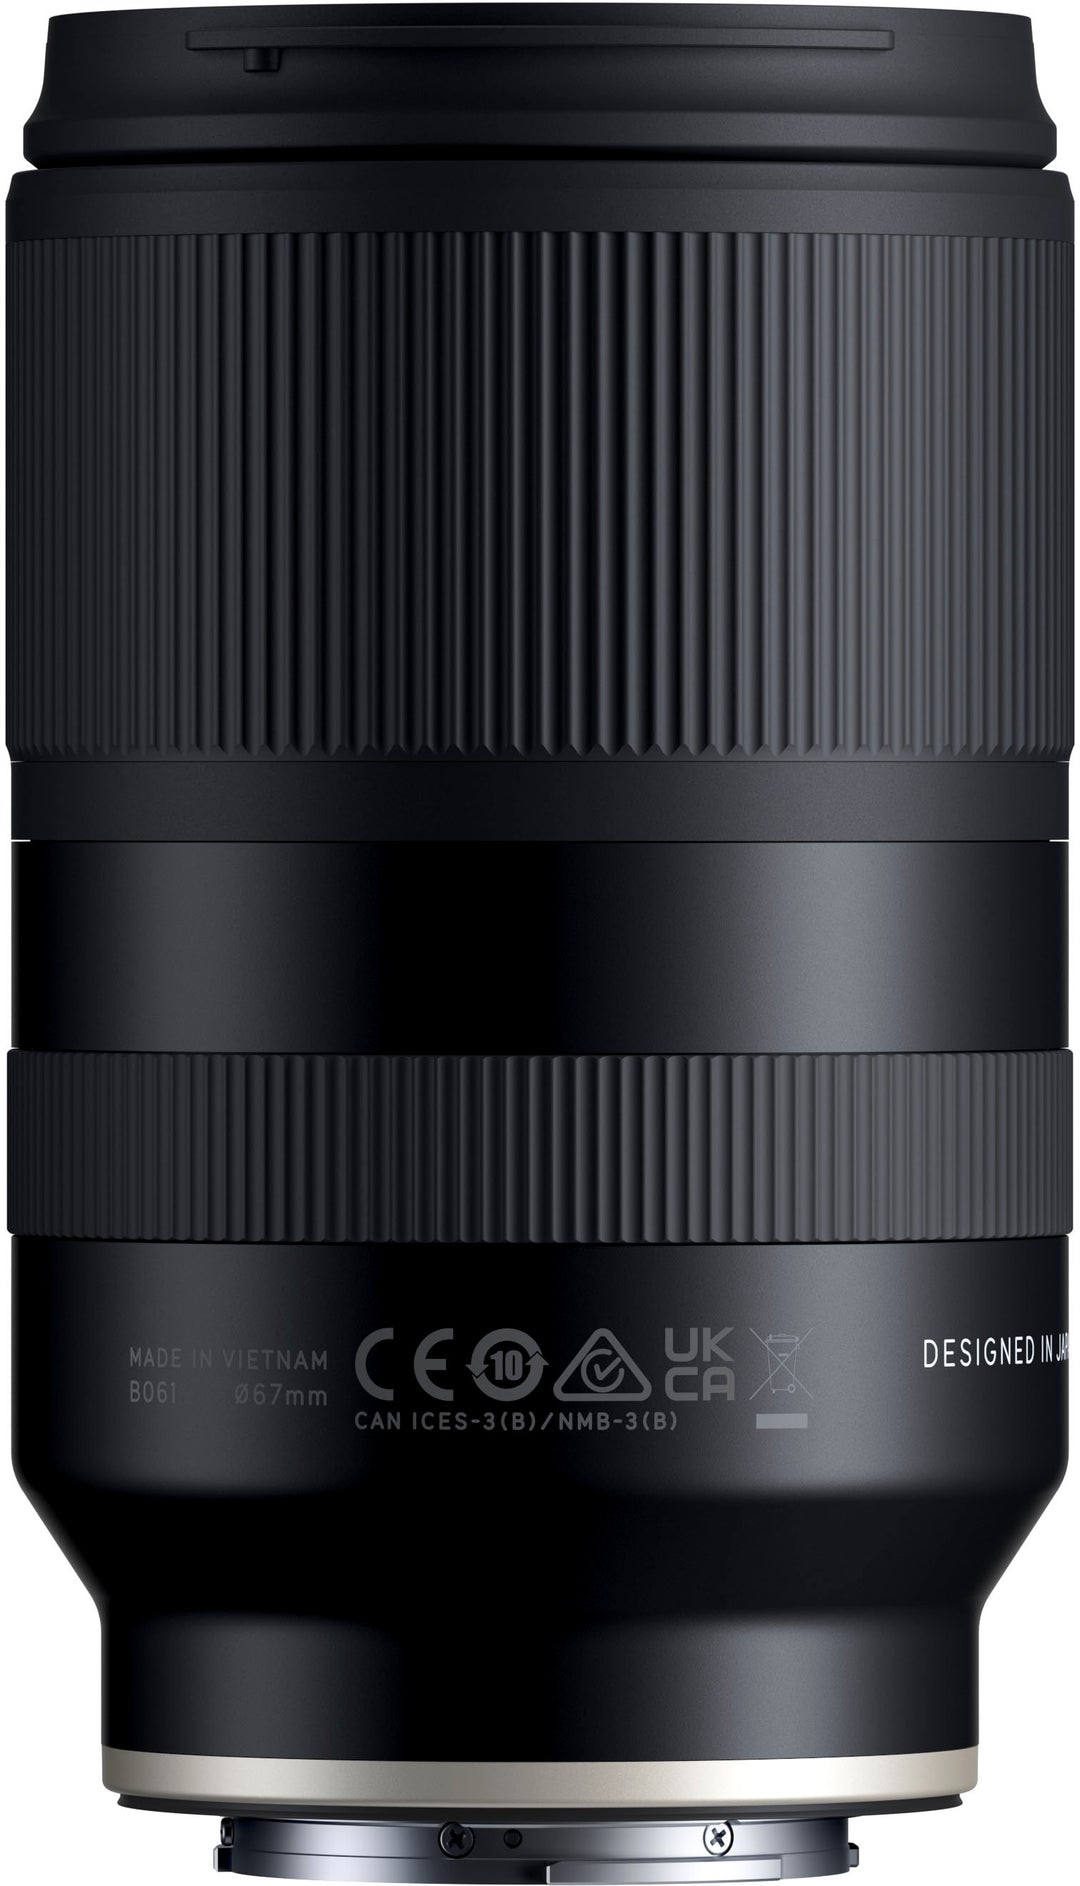 Tamron - 18-300mm f/3.5-6.3 Di III-A VC VXD All-In-One Zoom Lens for Sony E-Mount Cameras_3